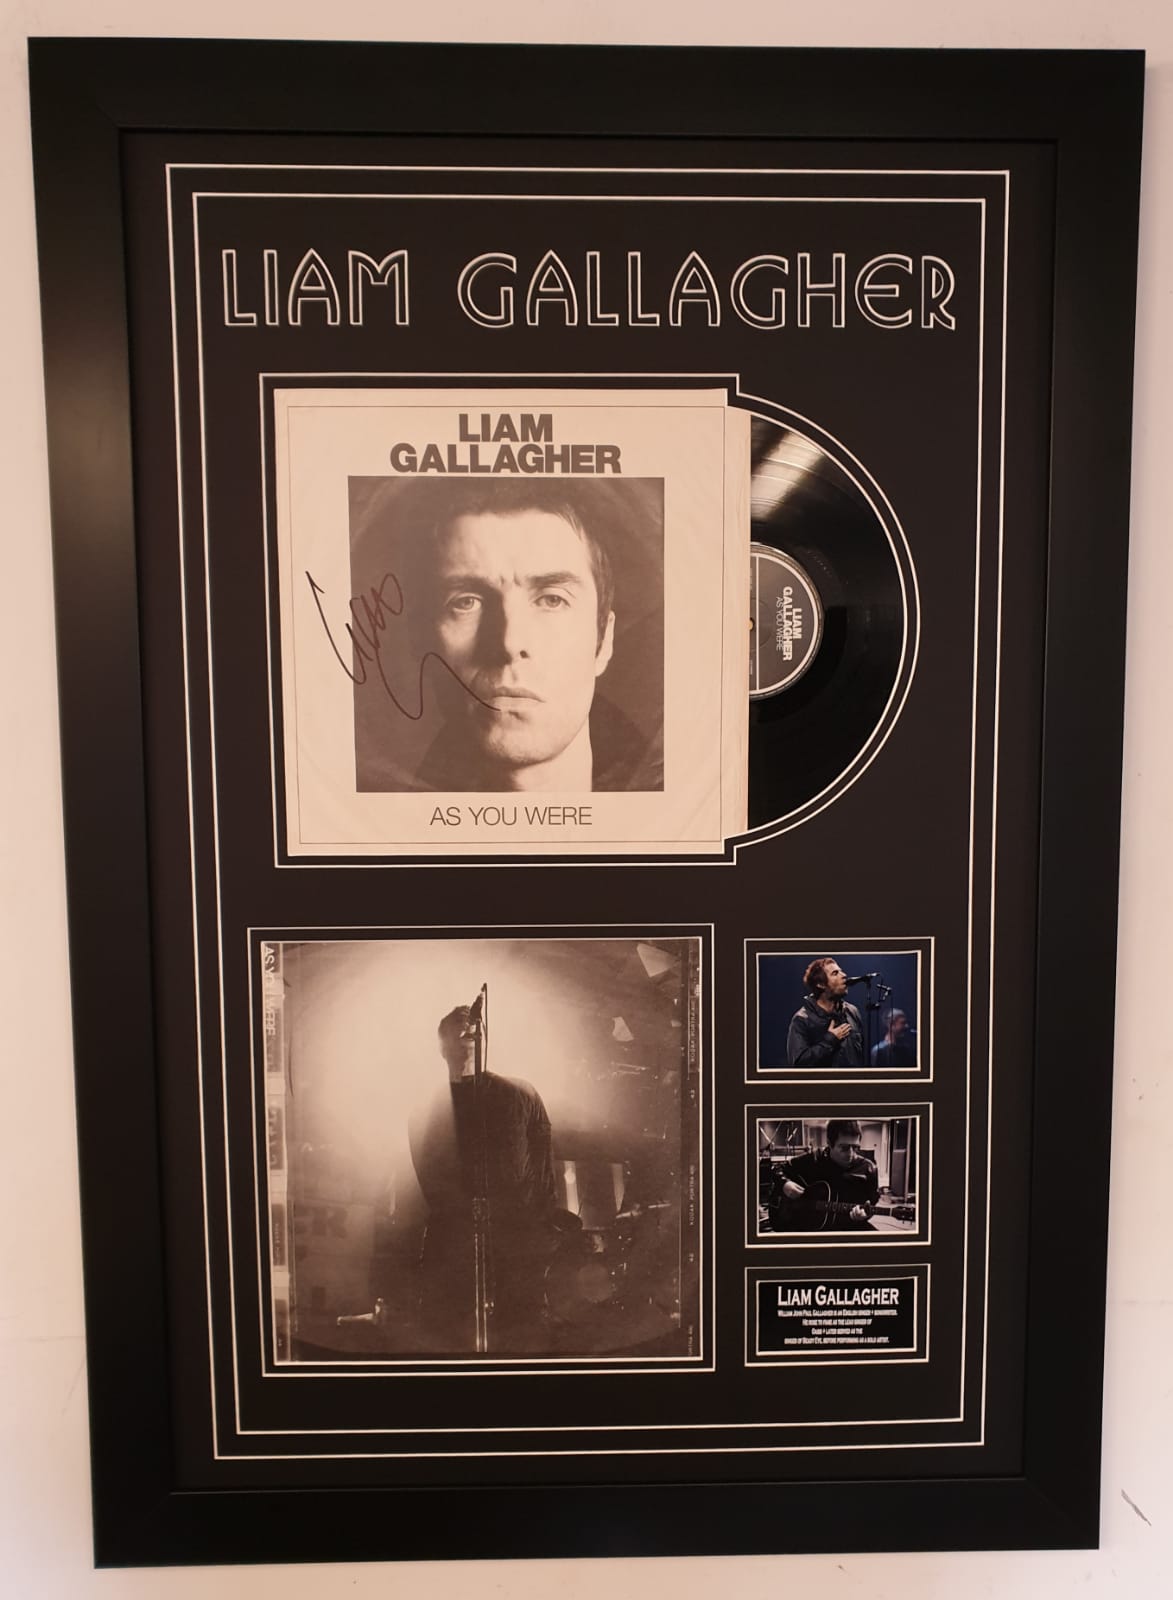 LIAM GALLAGHER AUTOGRAPHED SIGNED & FRAMED PP POSTER PHOTO 